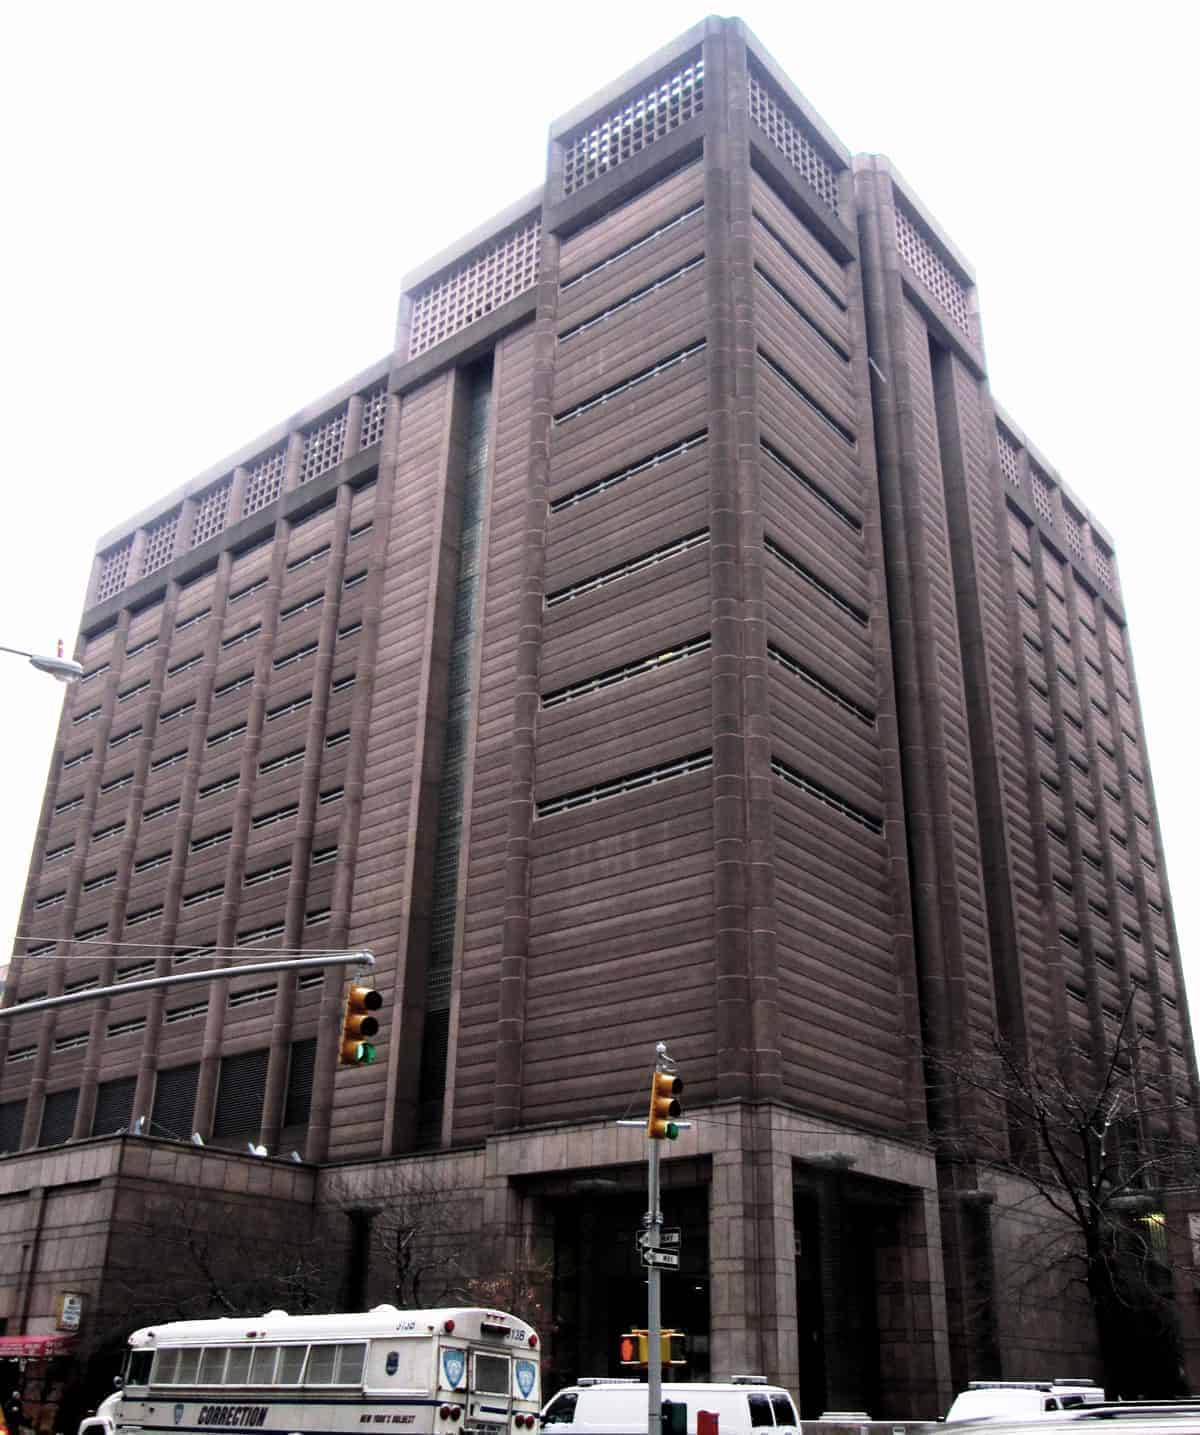 The north building of the Manhattan Detention Complex (